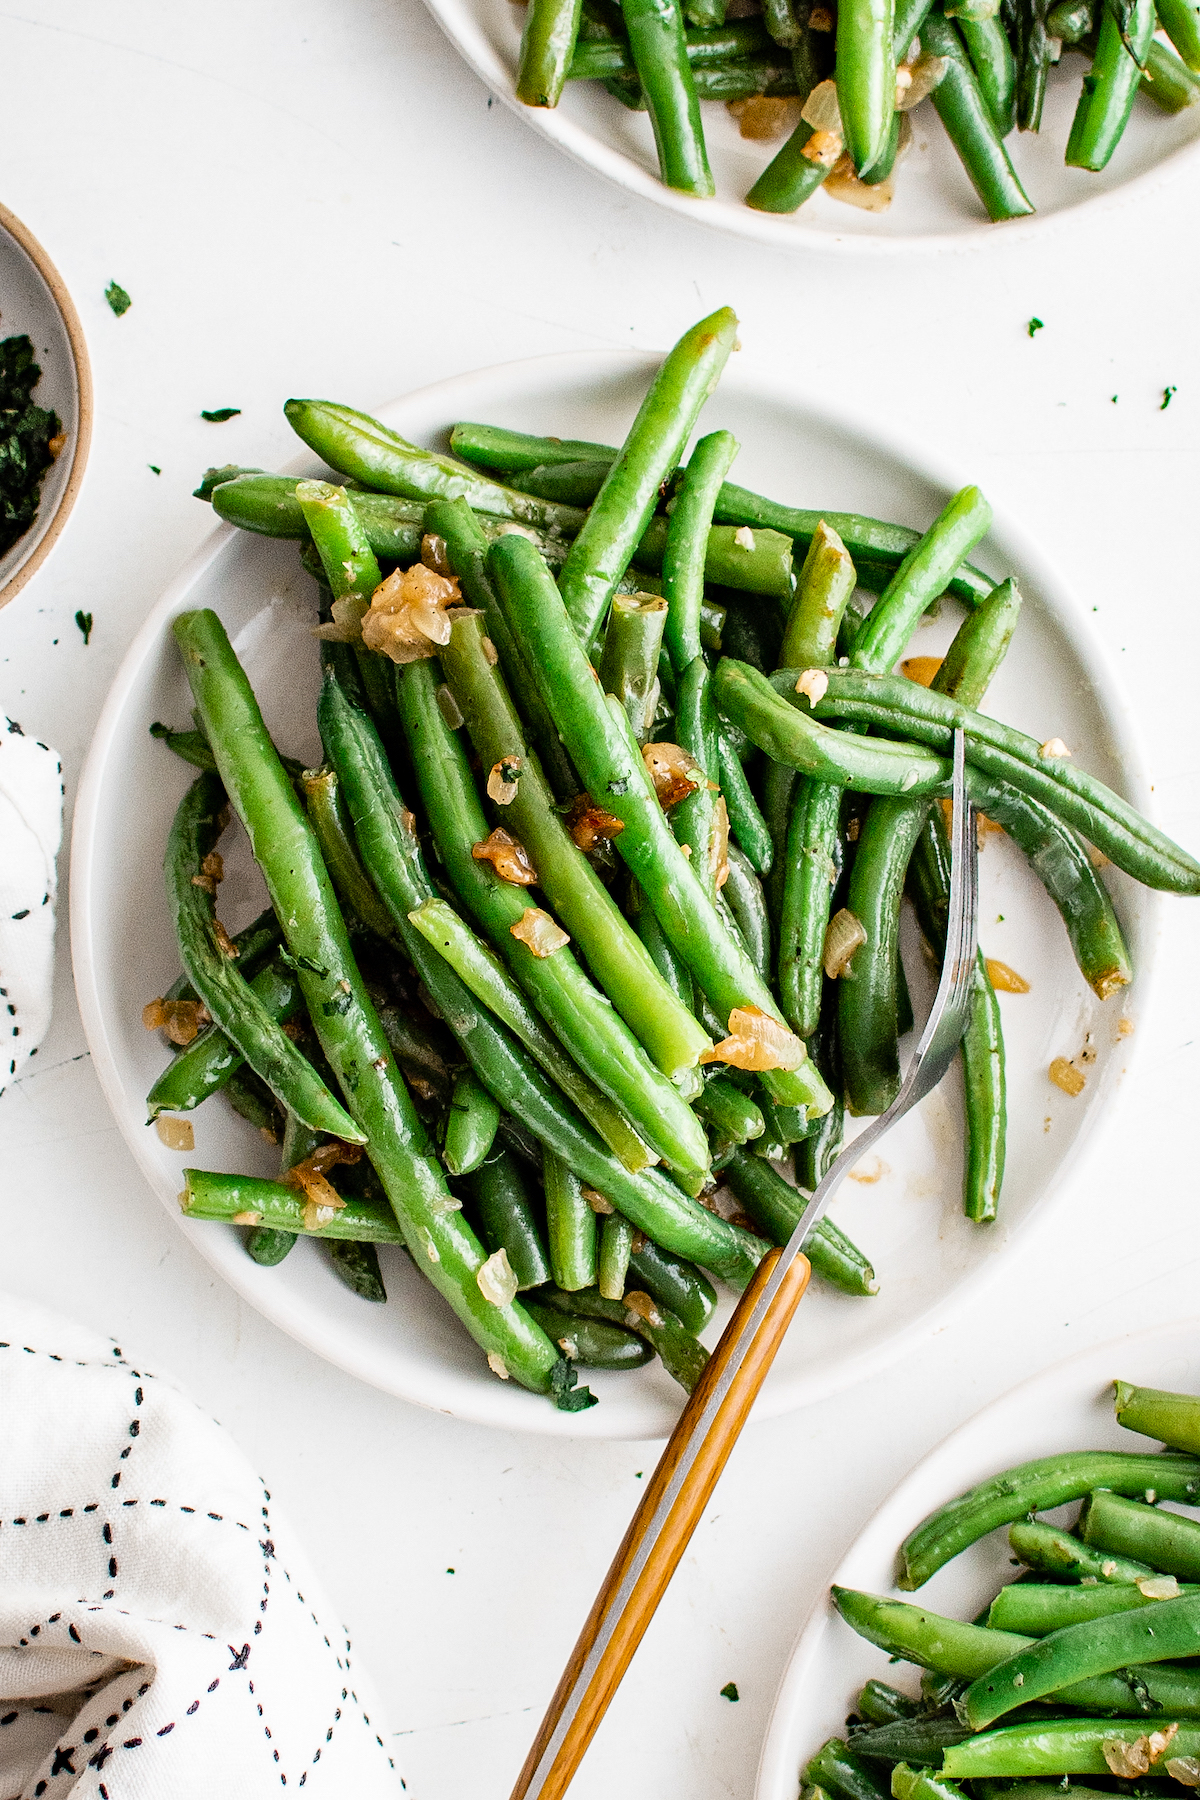 Green beans with garlic on a small plate with a fork. Other small plates of beans are visible in the shot.